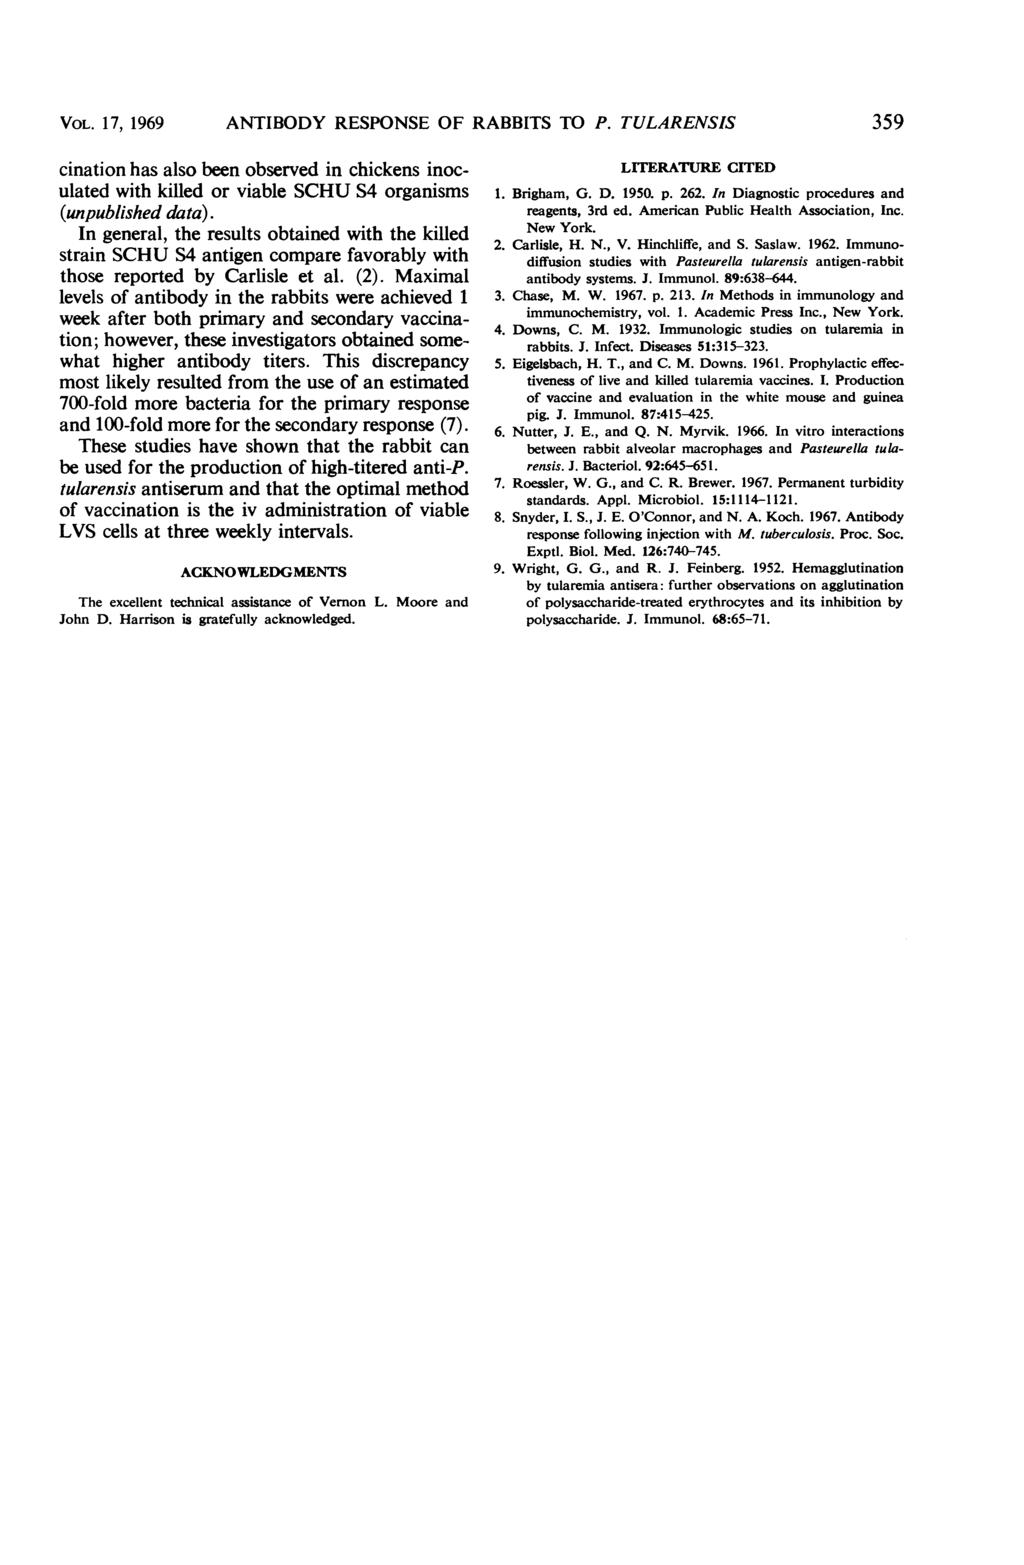 VOL. 17, 1969 ANTIBODY RESPONSE OF RABBITS TO P. TULARENSIS 359 cination has also been observed in chickens inoculated with killed or viable SCHU S4 organisms (unpublished data).